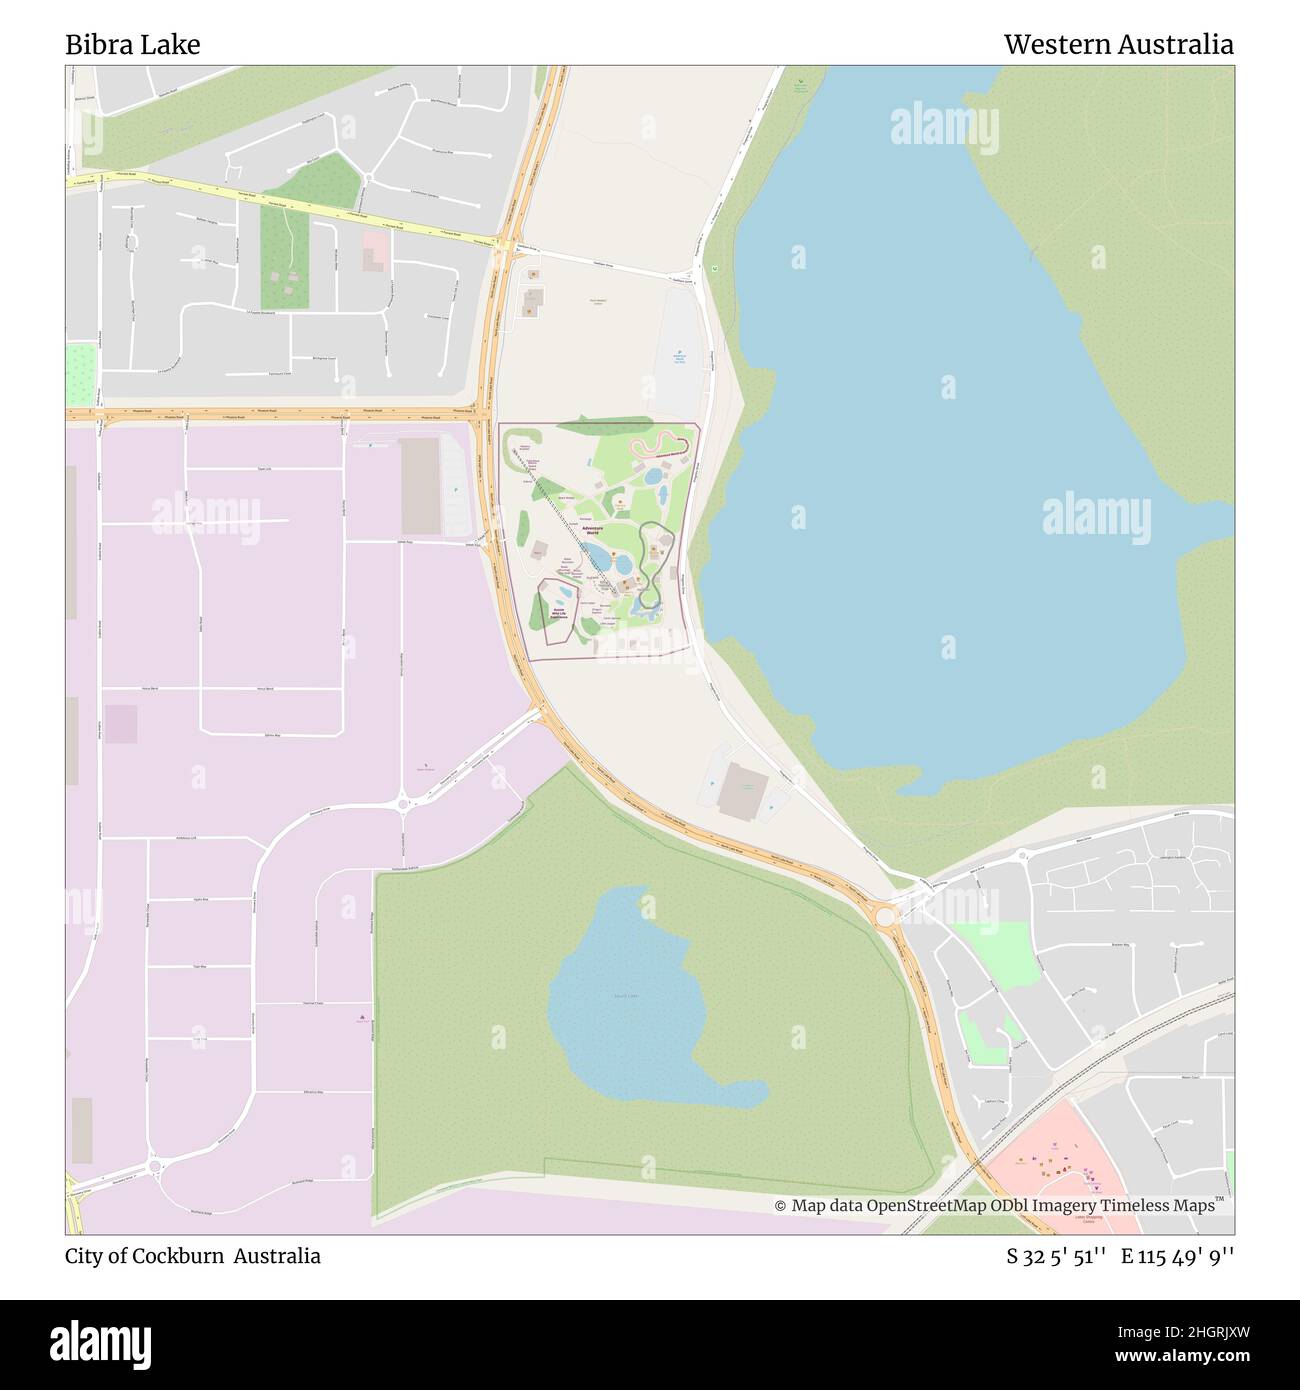 Bibra Lake, City of Cockburn, Australia, Western Australia, S 32 5' 51'', E 115 49' 9'', map, Timeless Map published in 2021. Travelers, explorers and adventurers like Florence Nightingale, David Livingstone, Ernest Shackleton, Lewis and Clark and Sherlock Holmes relied on maps to plan travels to the world's most remote corners, Timeless Maps is mapping most locations on the globe, showing the achievement of great dreams Stock Photo